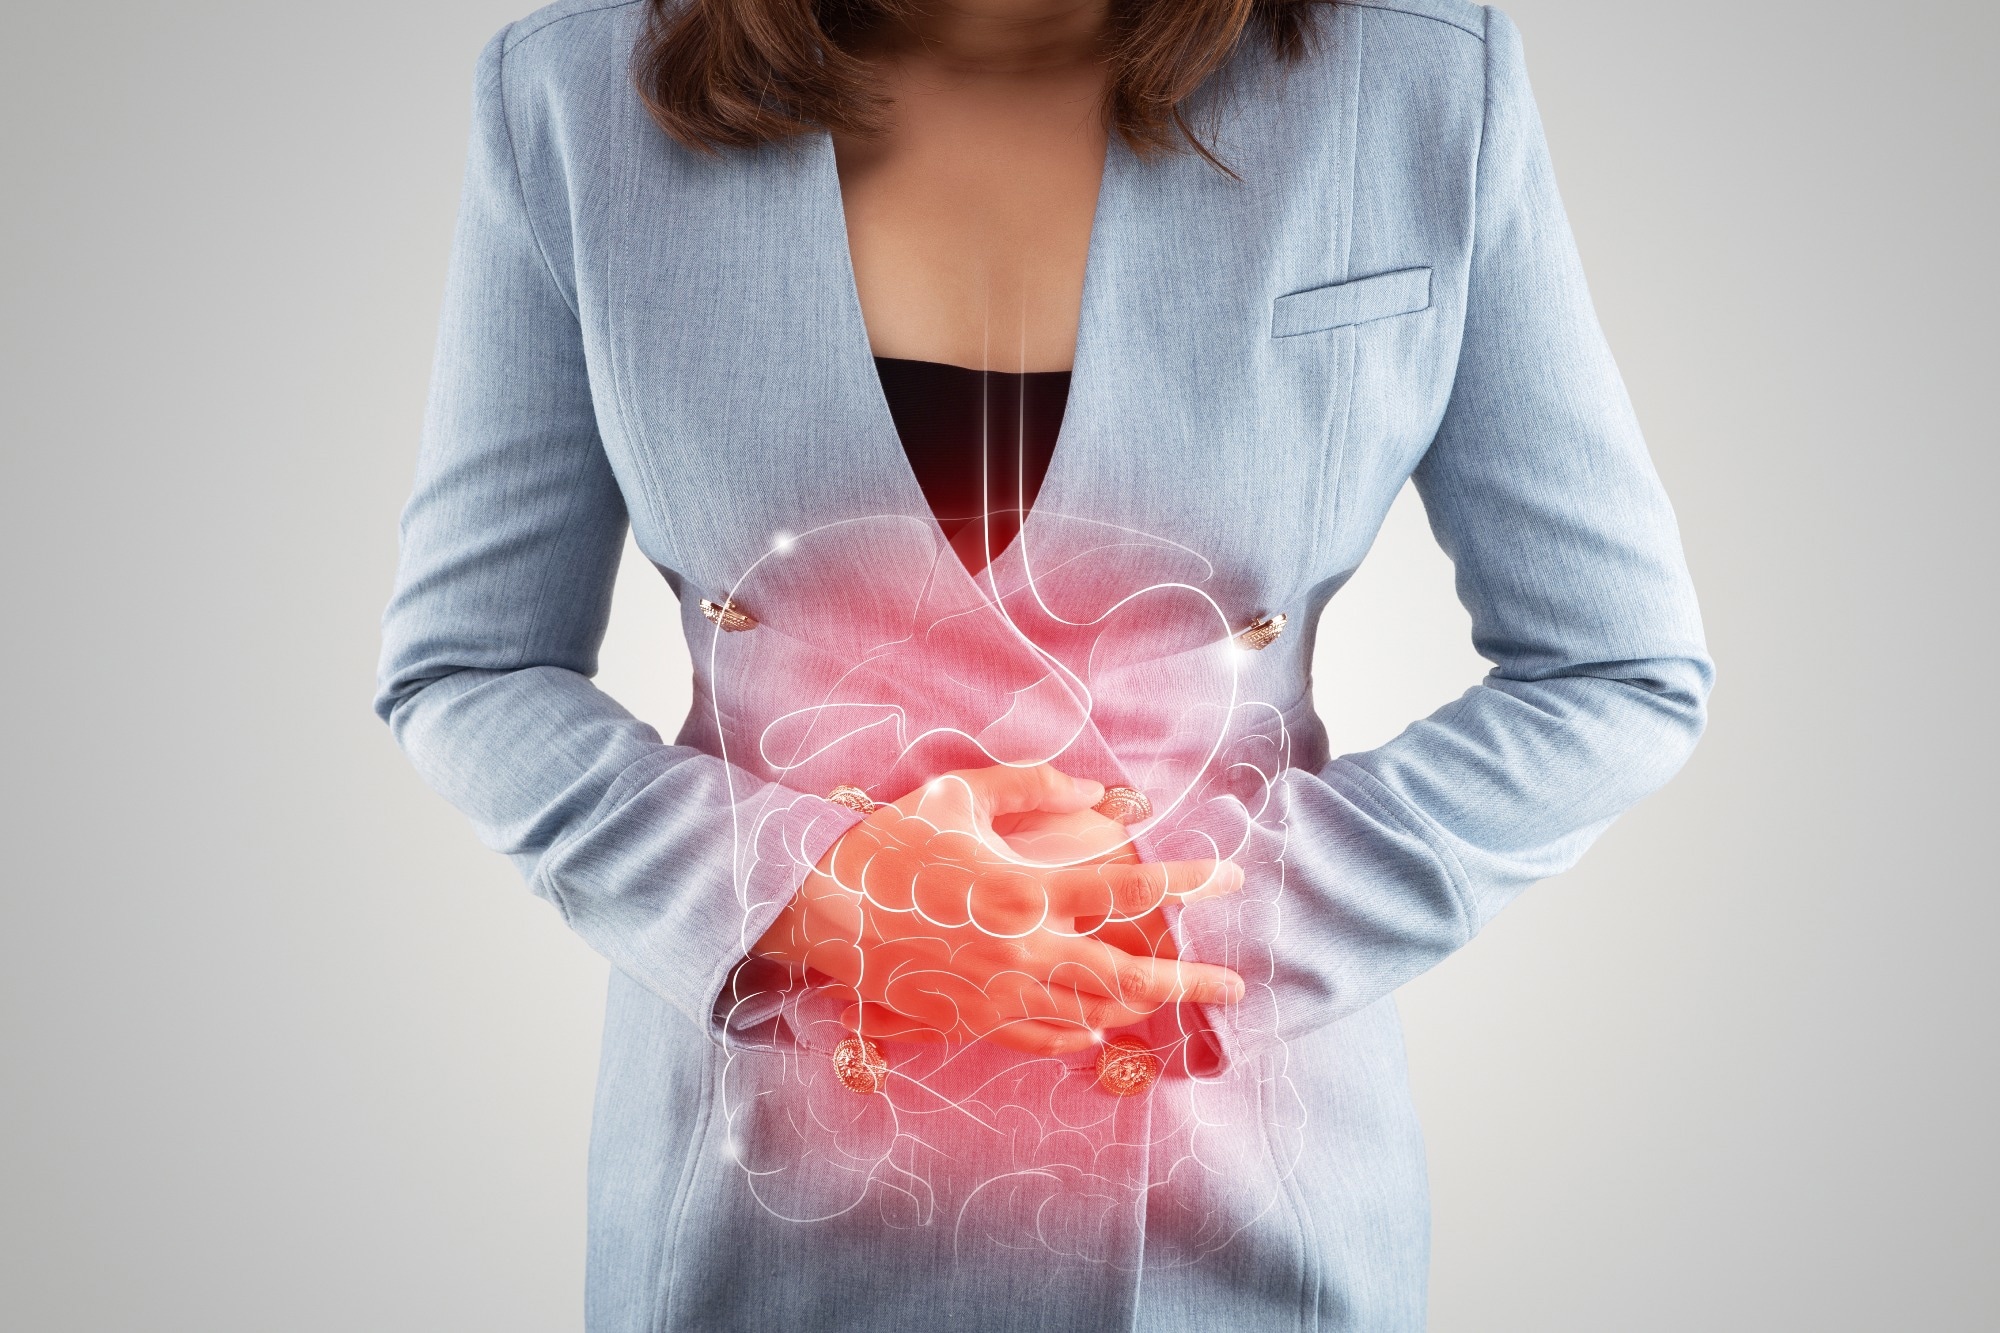 Study: Gravity and the Gut: A Hypothesis of Irritable Bowel Syndrome. Image Credit: Emily frost/Shutterstock